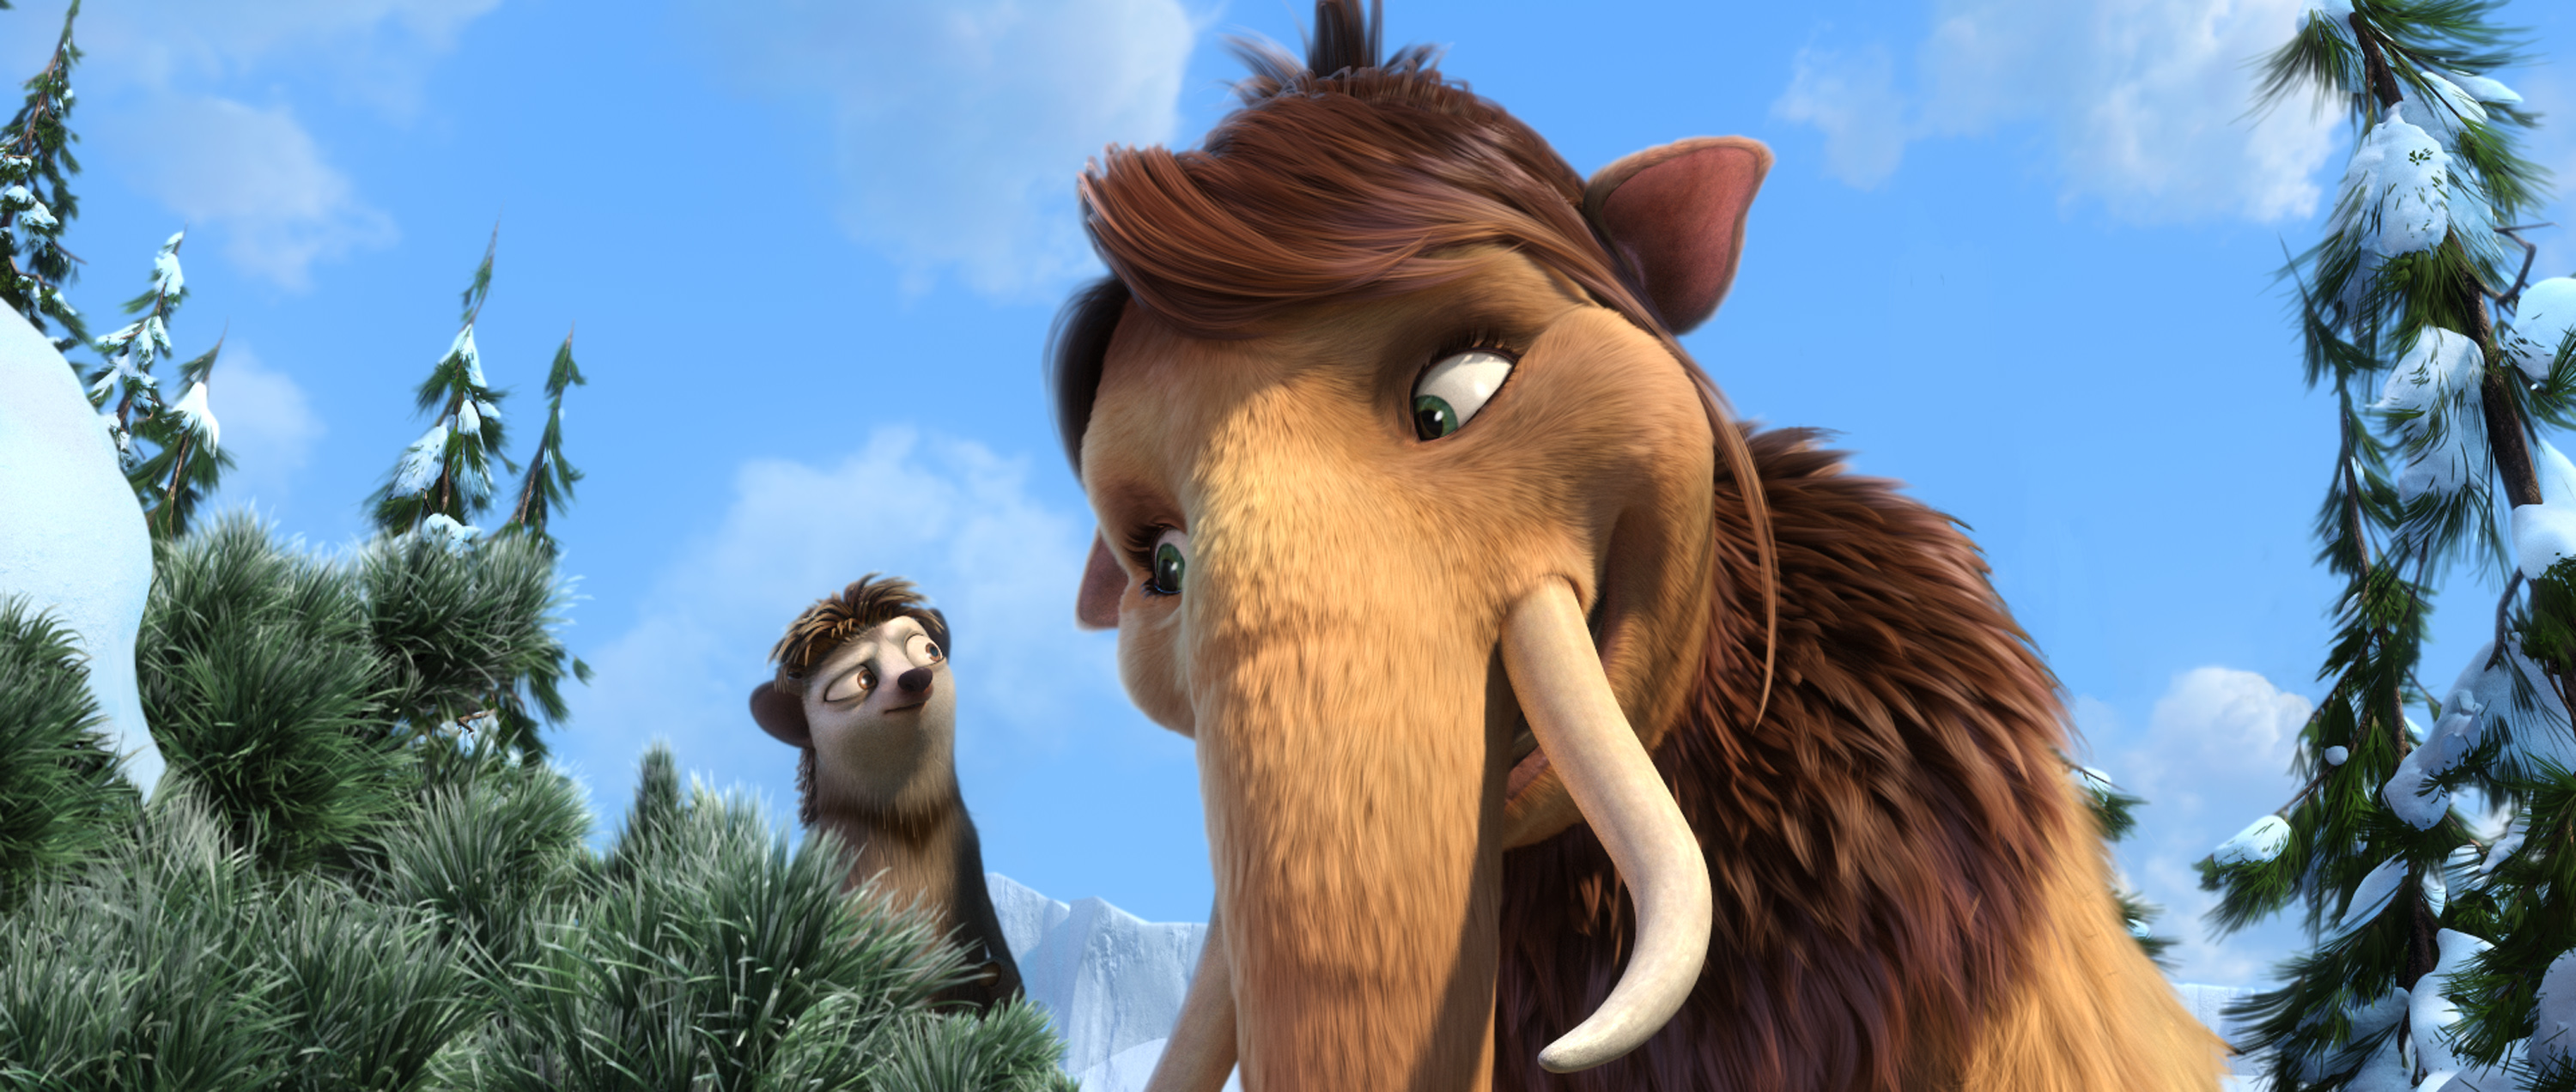 Ice Age: Continental Drift instal the new for ios